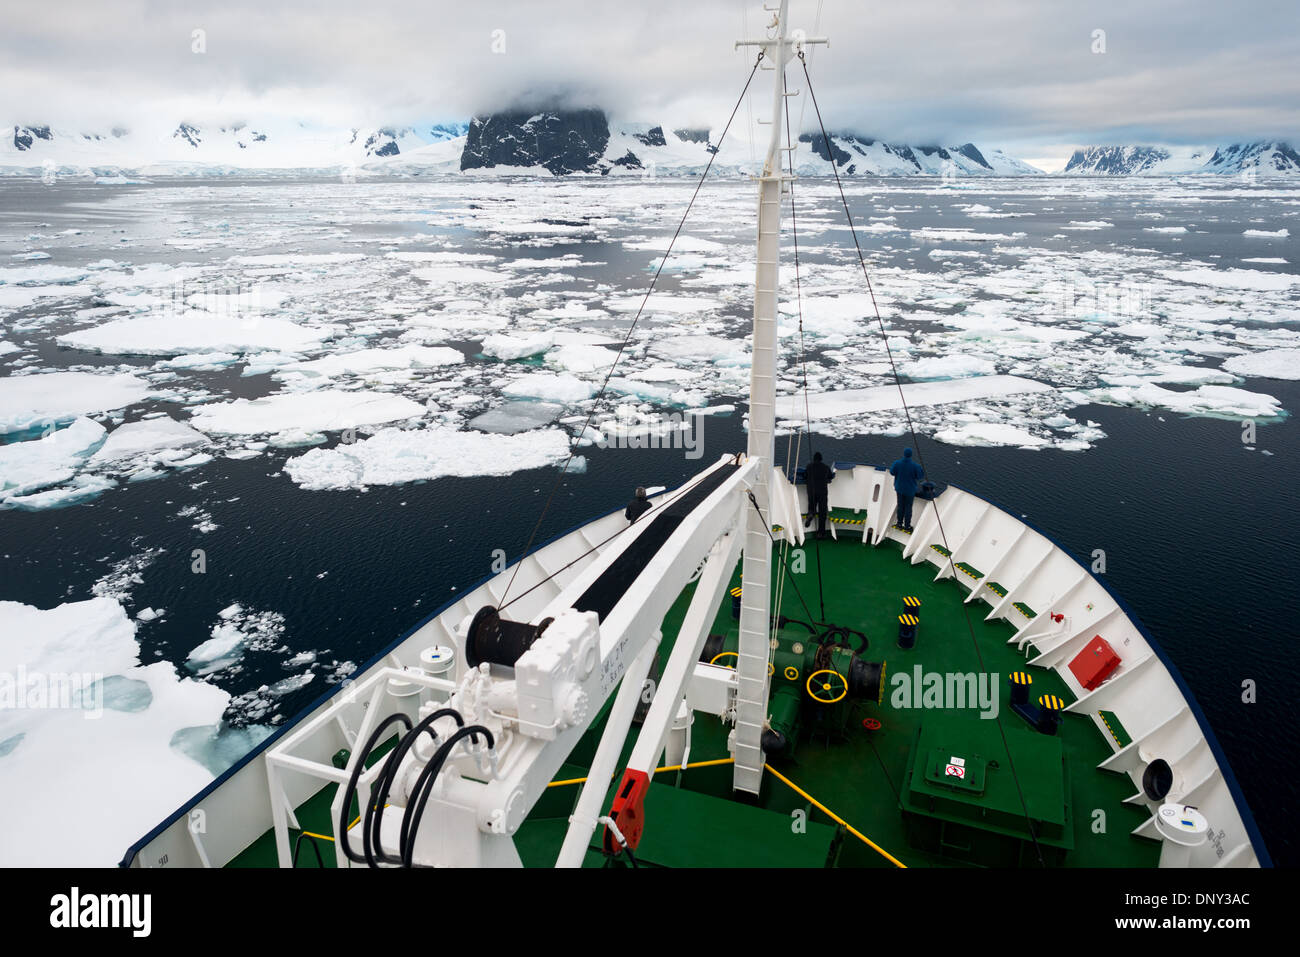 ANTARCTICA - An ice-strengthened ship pushes through the sea ice at the northern end of the Lemaire Channel along the Antarctic Peninsula. Stock Photo